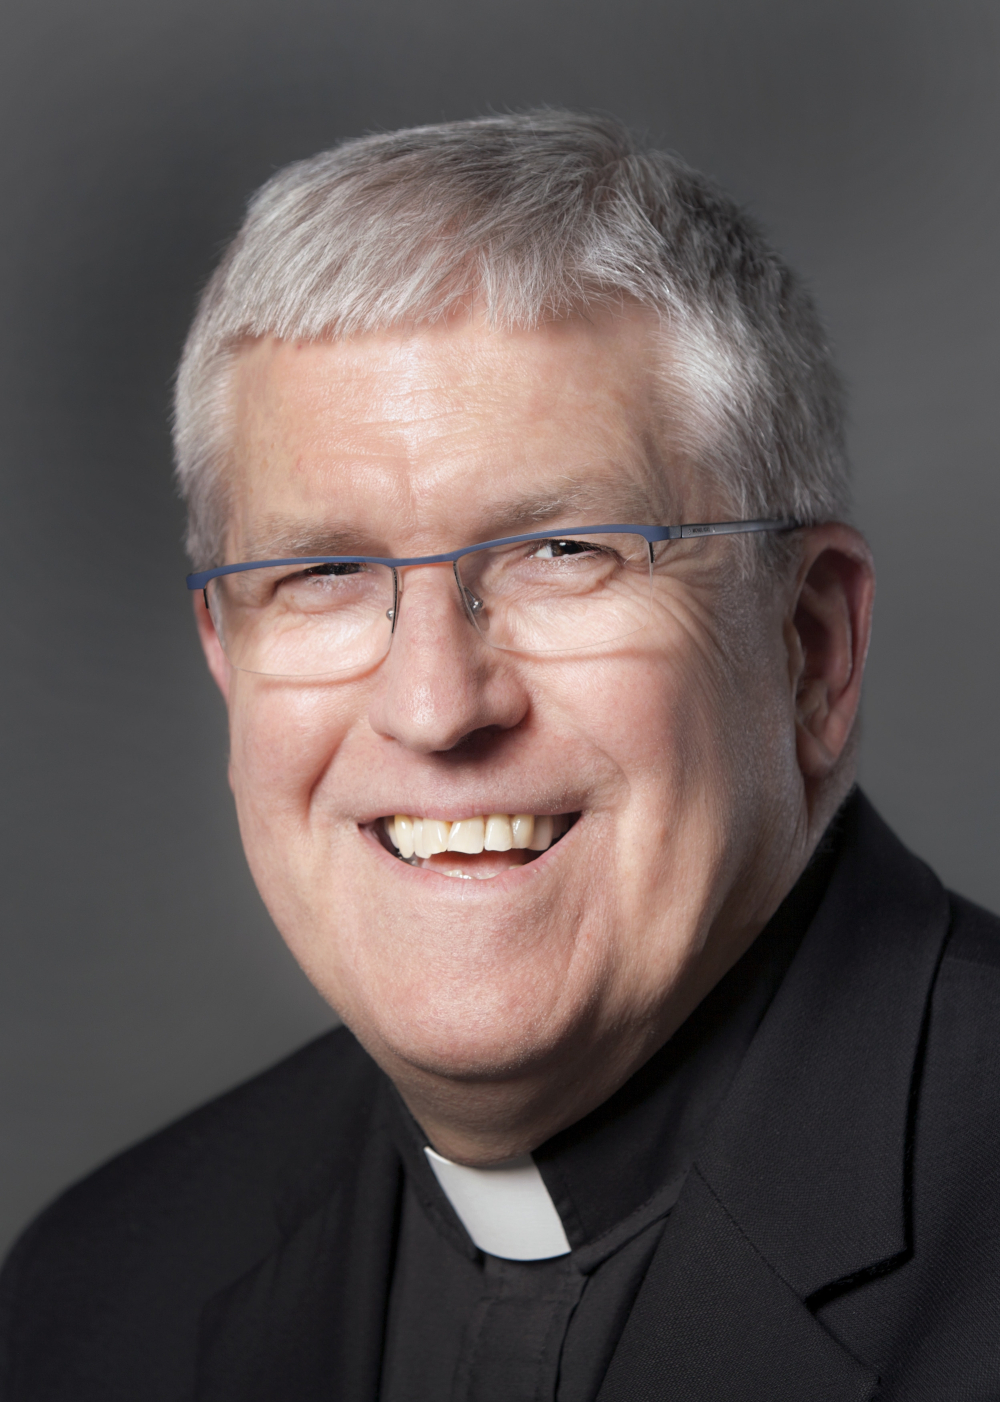 A white man with white hair and glasses wears a cassock and smiles into the camera